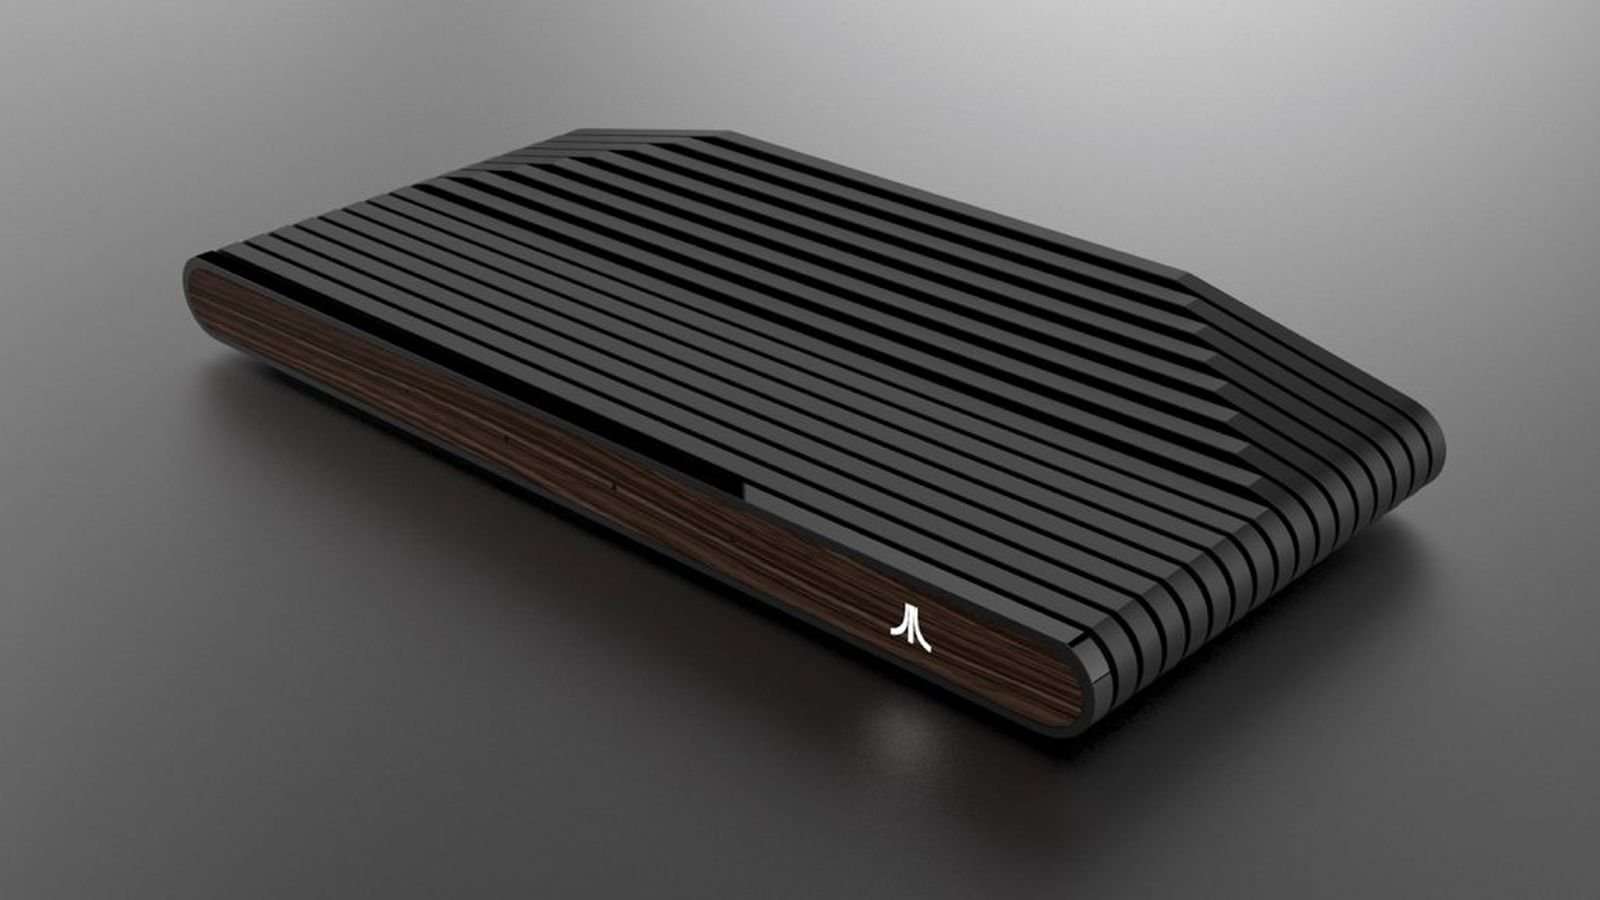 image for Atari’s new Ataribox console will be like an NES Classic